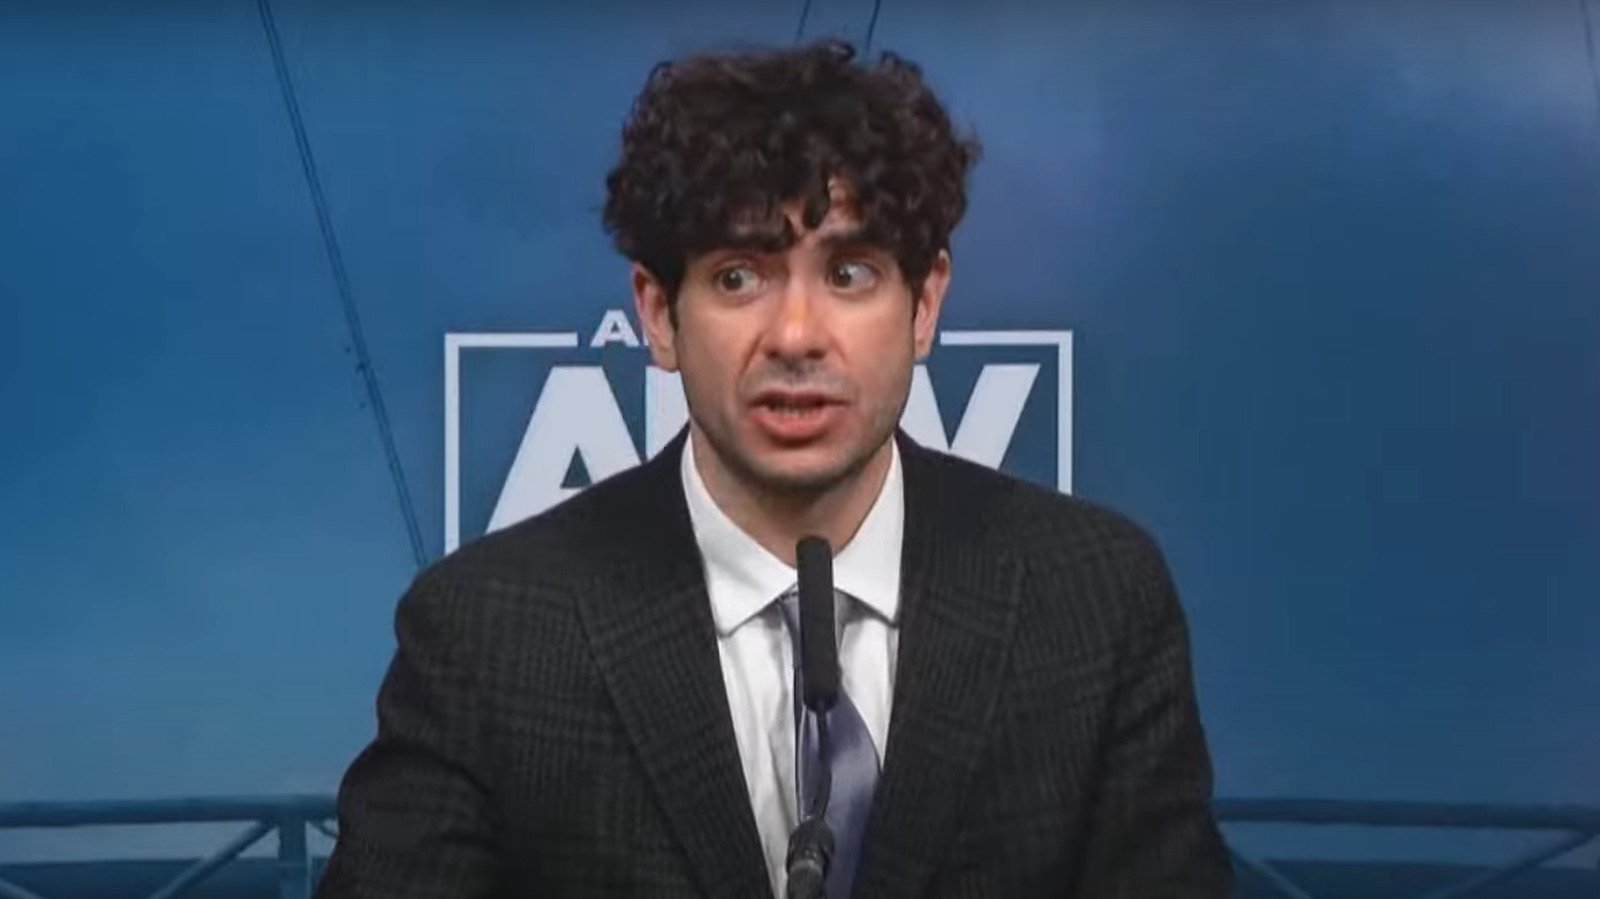 Tony Khan Explains Why AEW All In Only Had One Match Featuring The ...